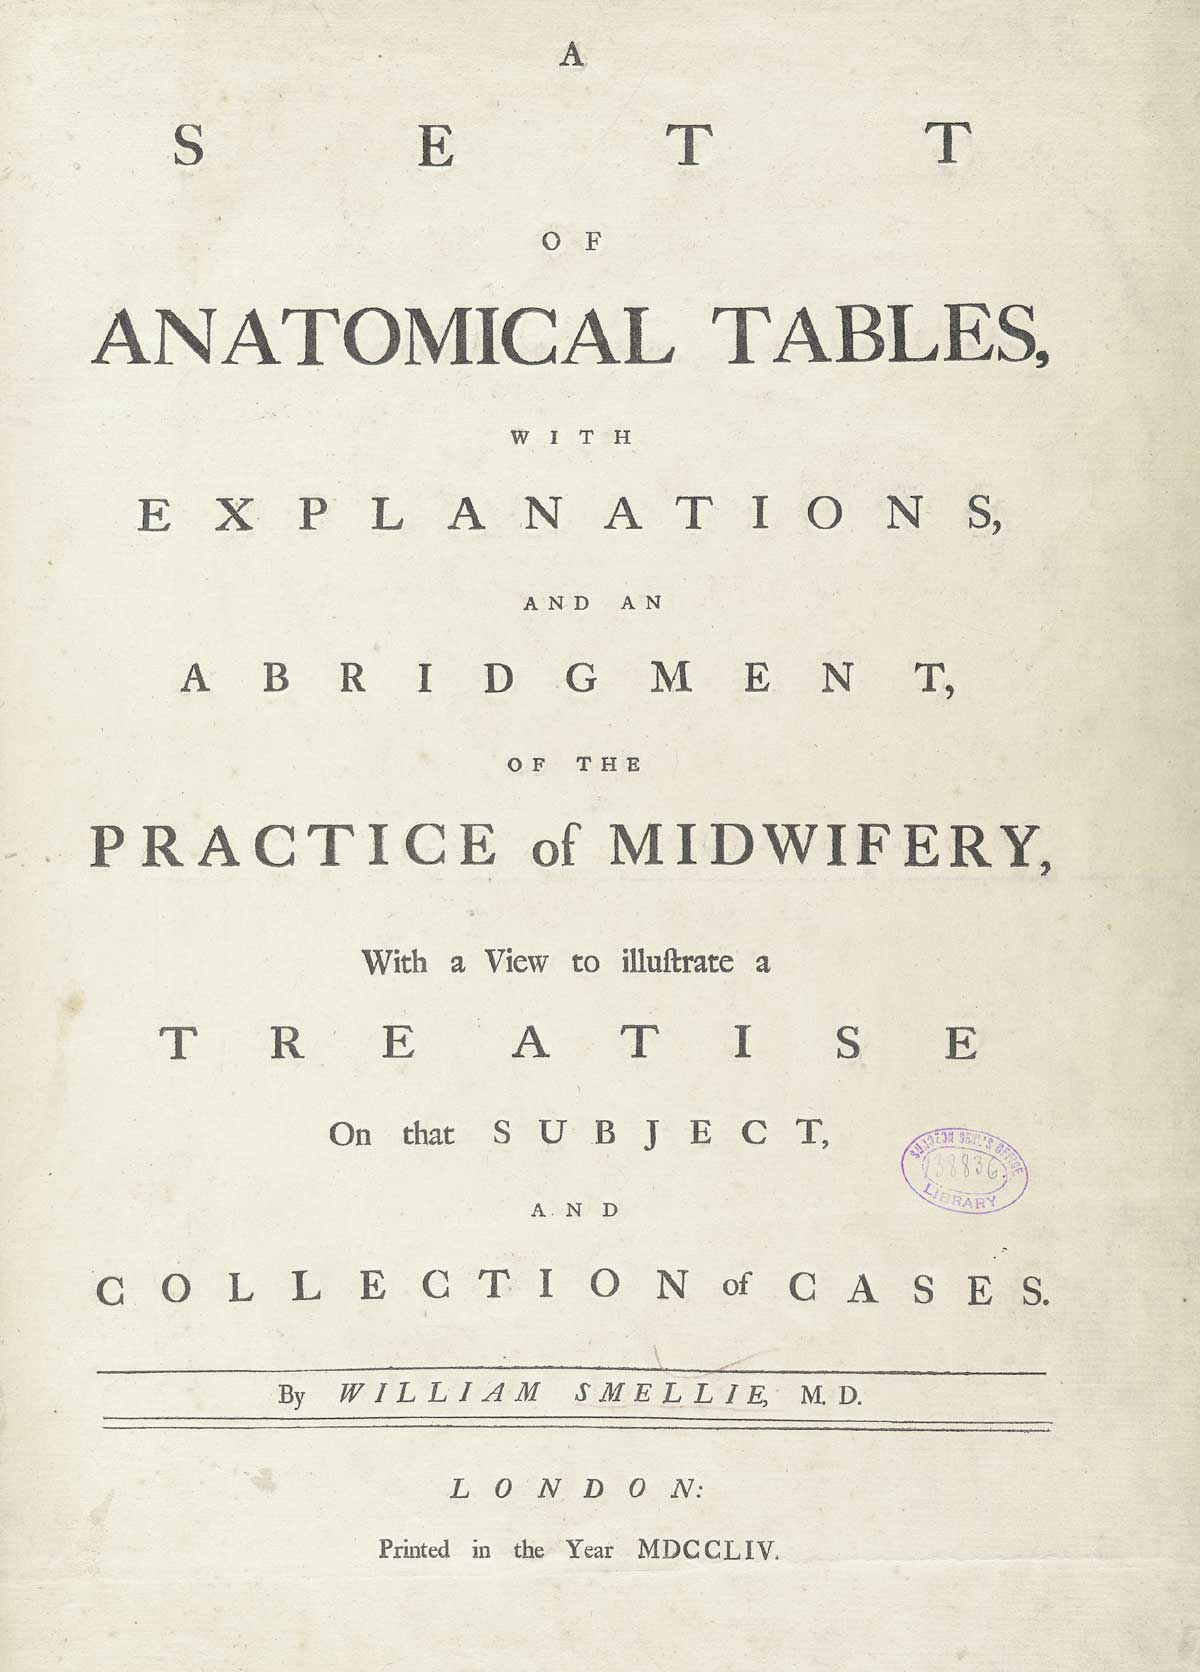 Title page of William Smellie's A sett of anatomical tables, with explanations, and an abridgment, of the practice of midwifery.